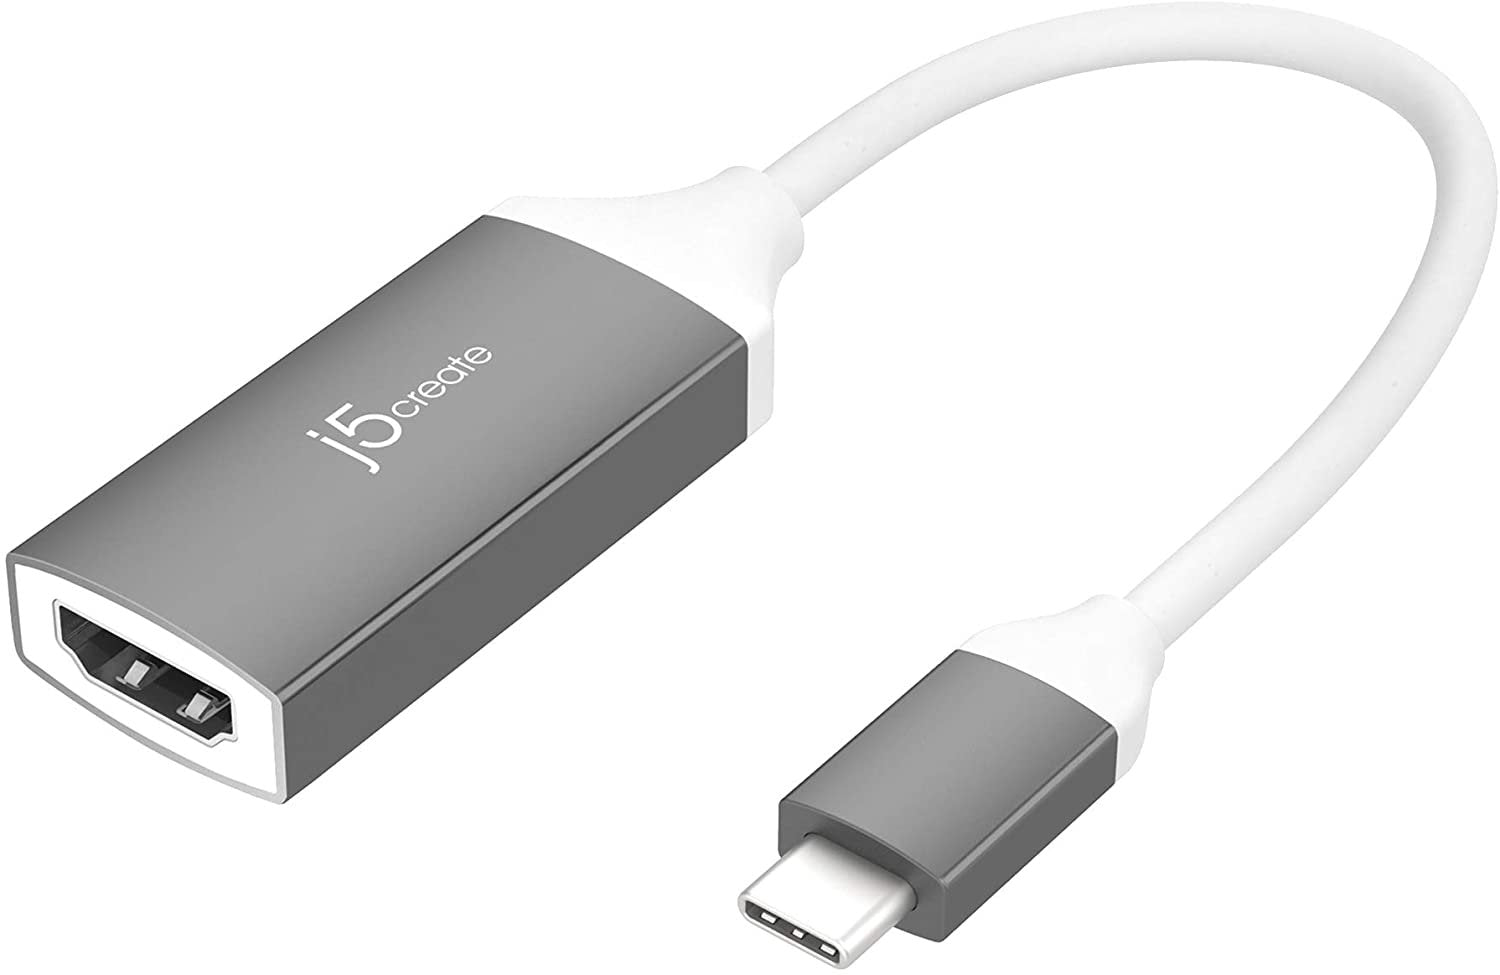 j5create USB Type-C to 4K HDMI Adapter 3840 x 2160 @ 60Hz | HDMI 1.4 4K @ 30 Hz to 4K @ 60 Hz | Adapter Compatible with MacBook, Chromebook, Tablet or PC